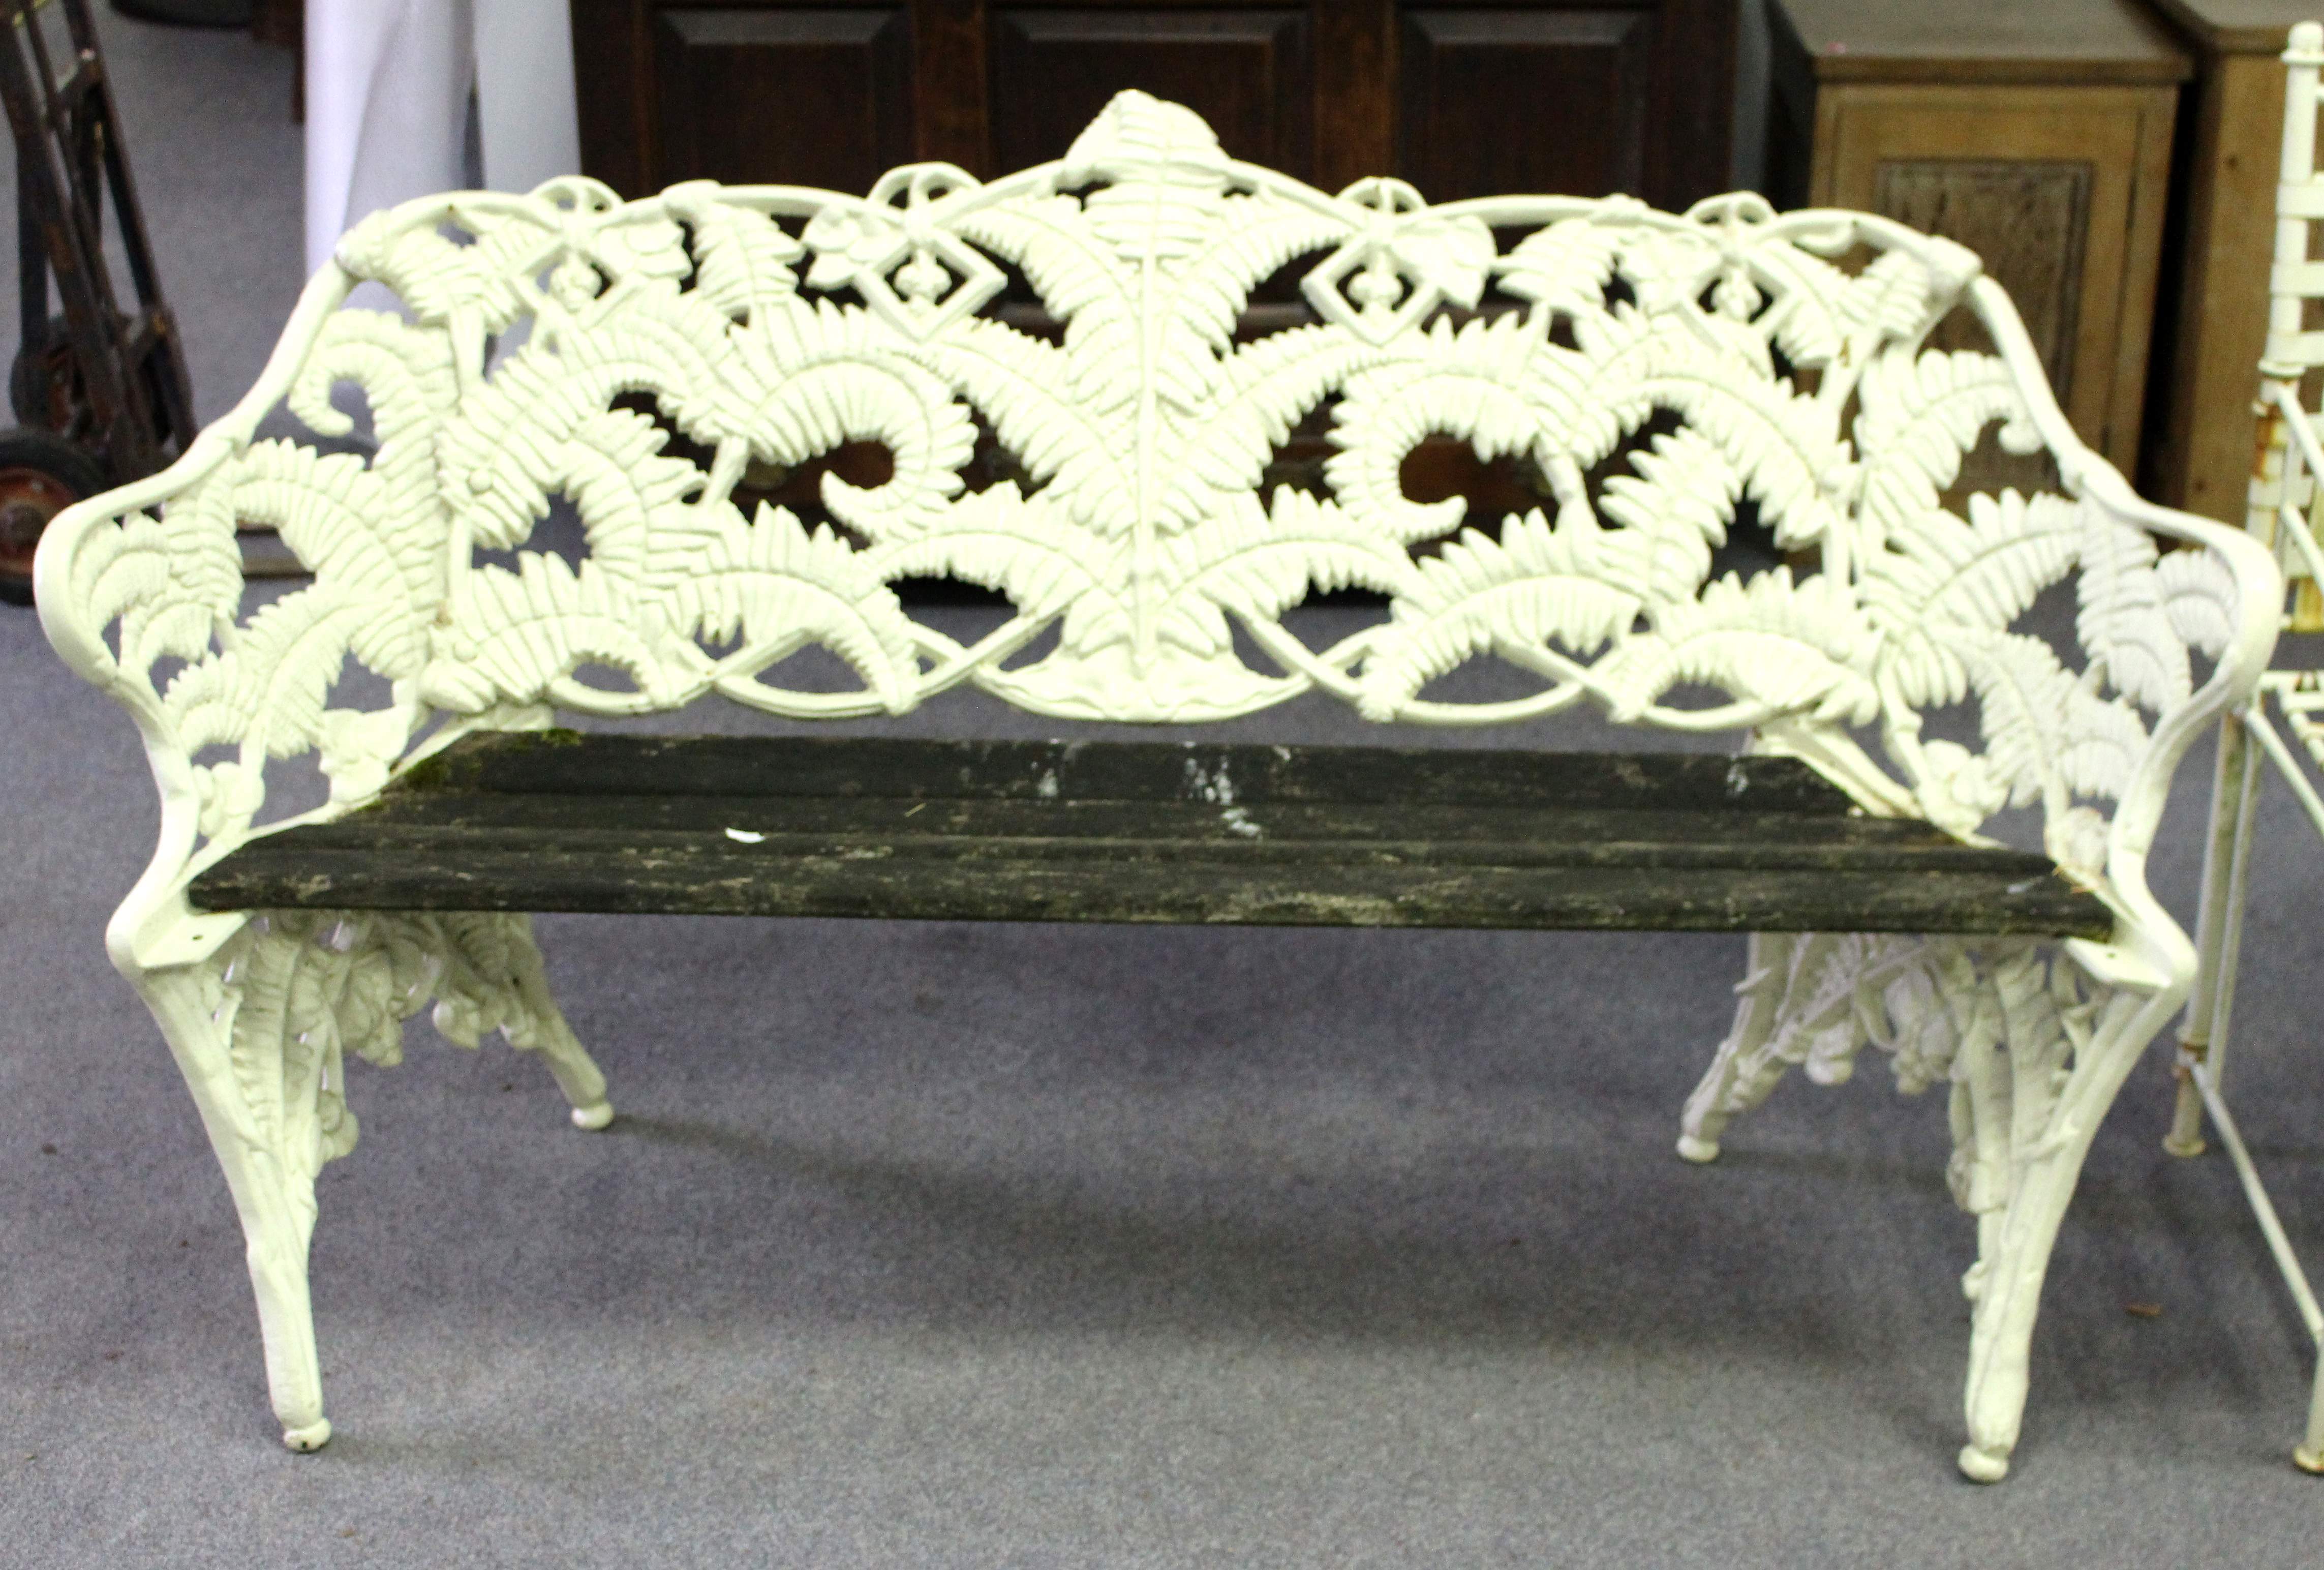 A fern pattern cast iron garden seat in the style of Coalbrookdale, with slatted wooden seat, - Image 2 of 3